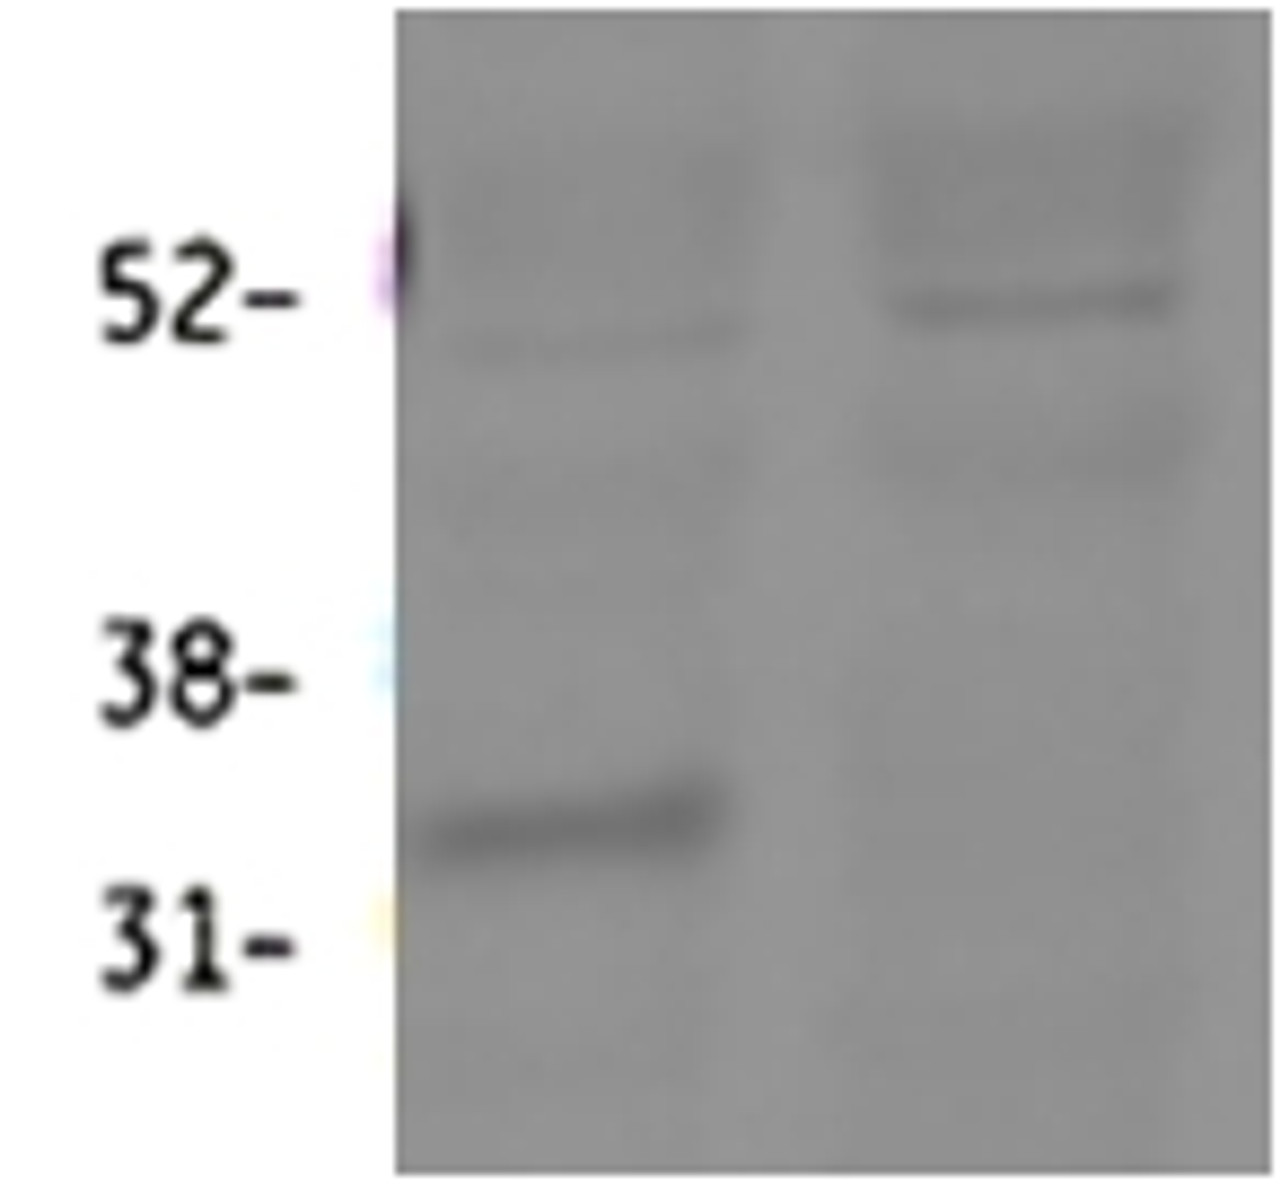 HEK293 lysate (10ug protein in RIPA buffer) over expressing Human DAP with DYKDDDDK tag probed with 42-779 (0.1ug/ml) in Lane A and probed with anti- DYKDDDDK Tag (1/3000) in lane C. Mock-transfected HEK293 probed with 42-779 (1mg/ml) in Lane B. Prima